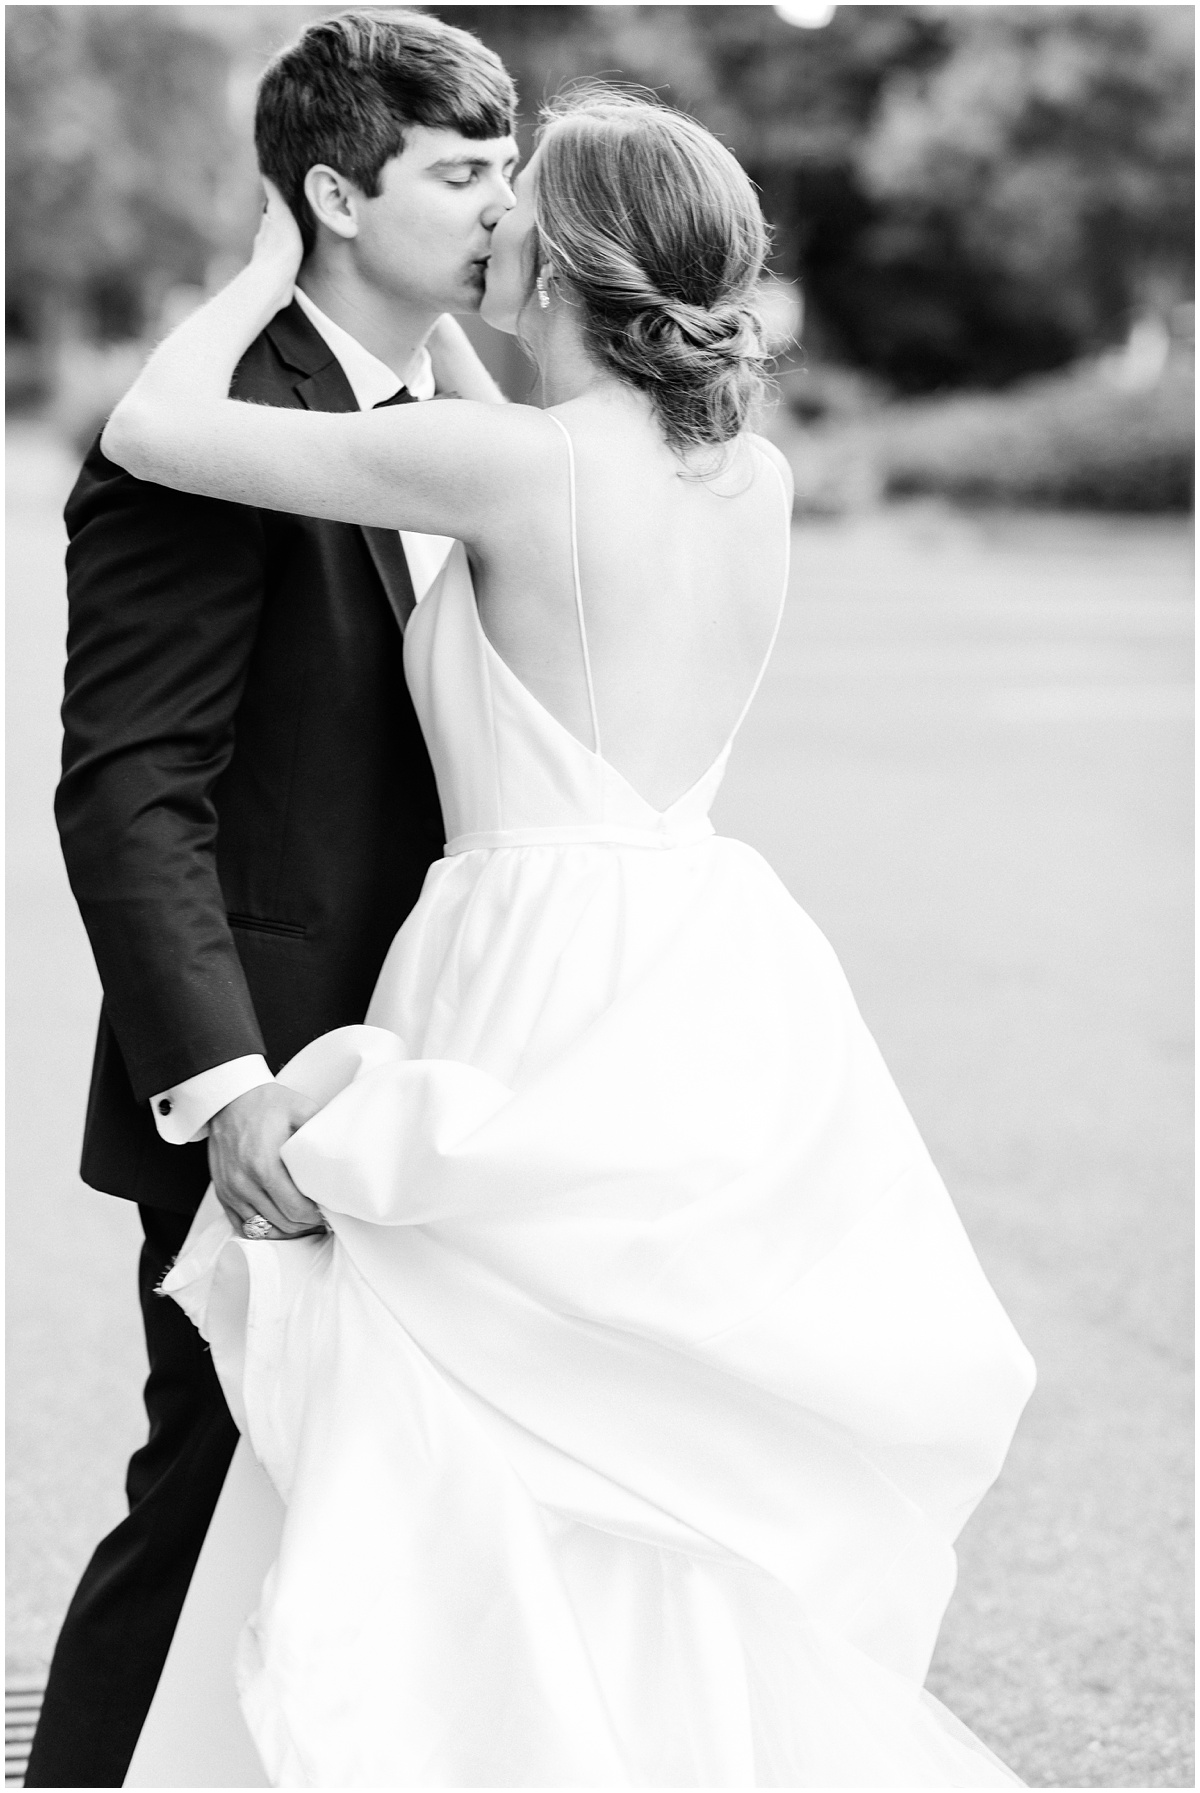 Downtown Greenville L Wedding Bride and Groom Sunset Photos